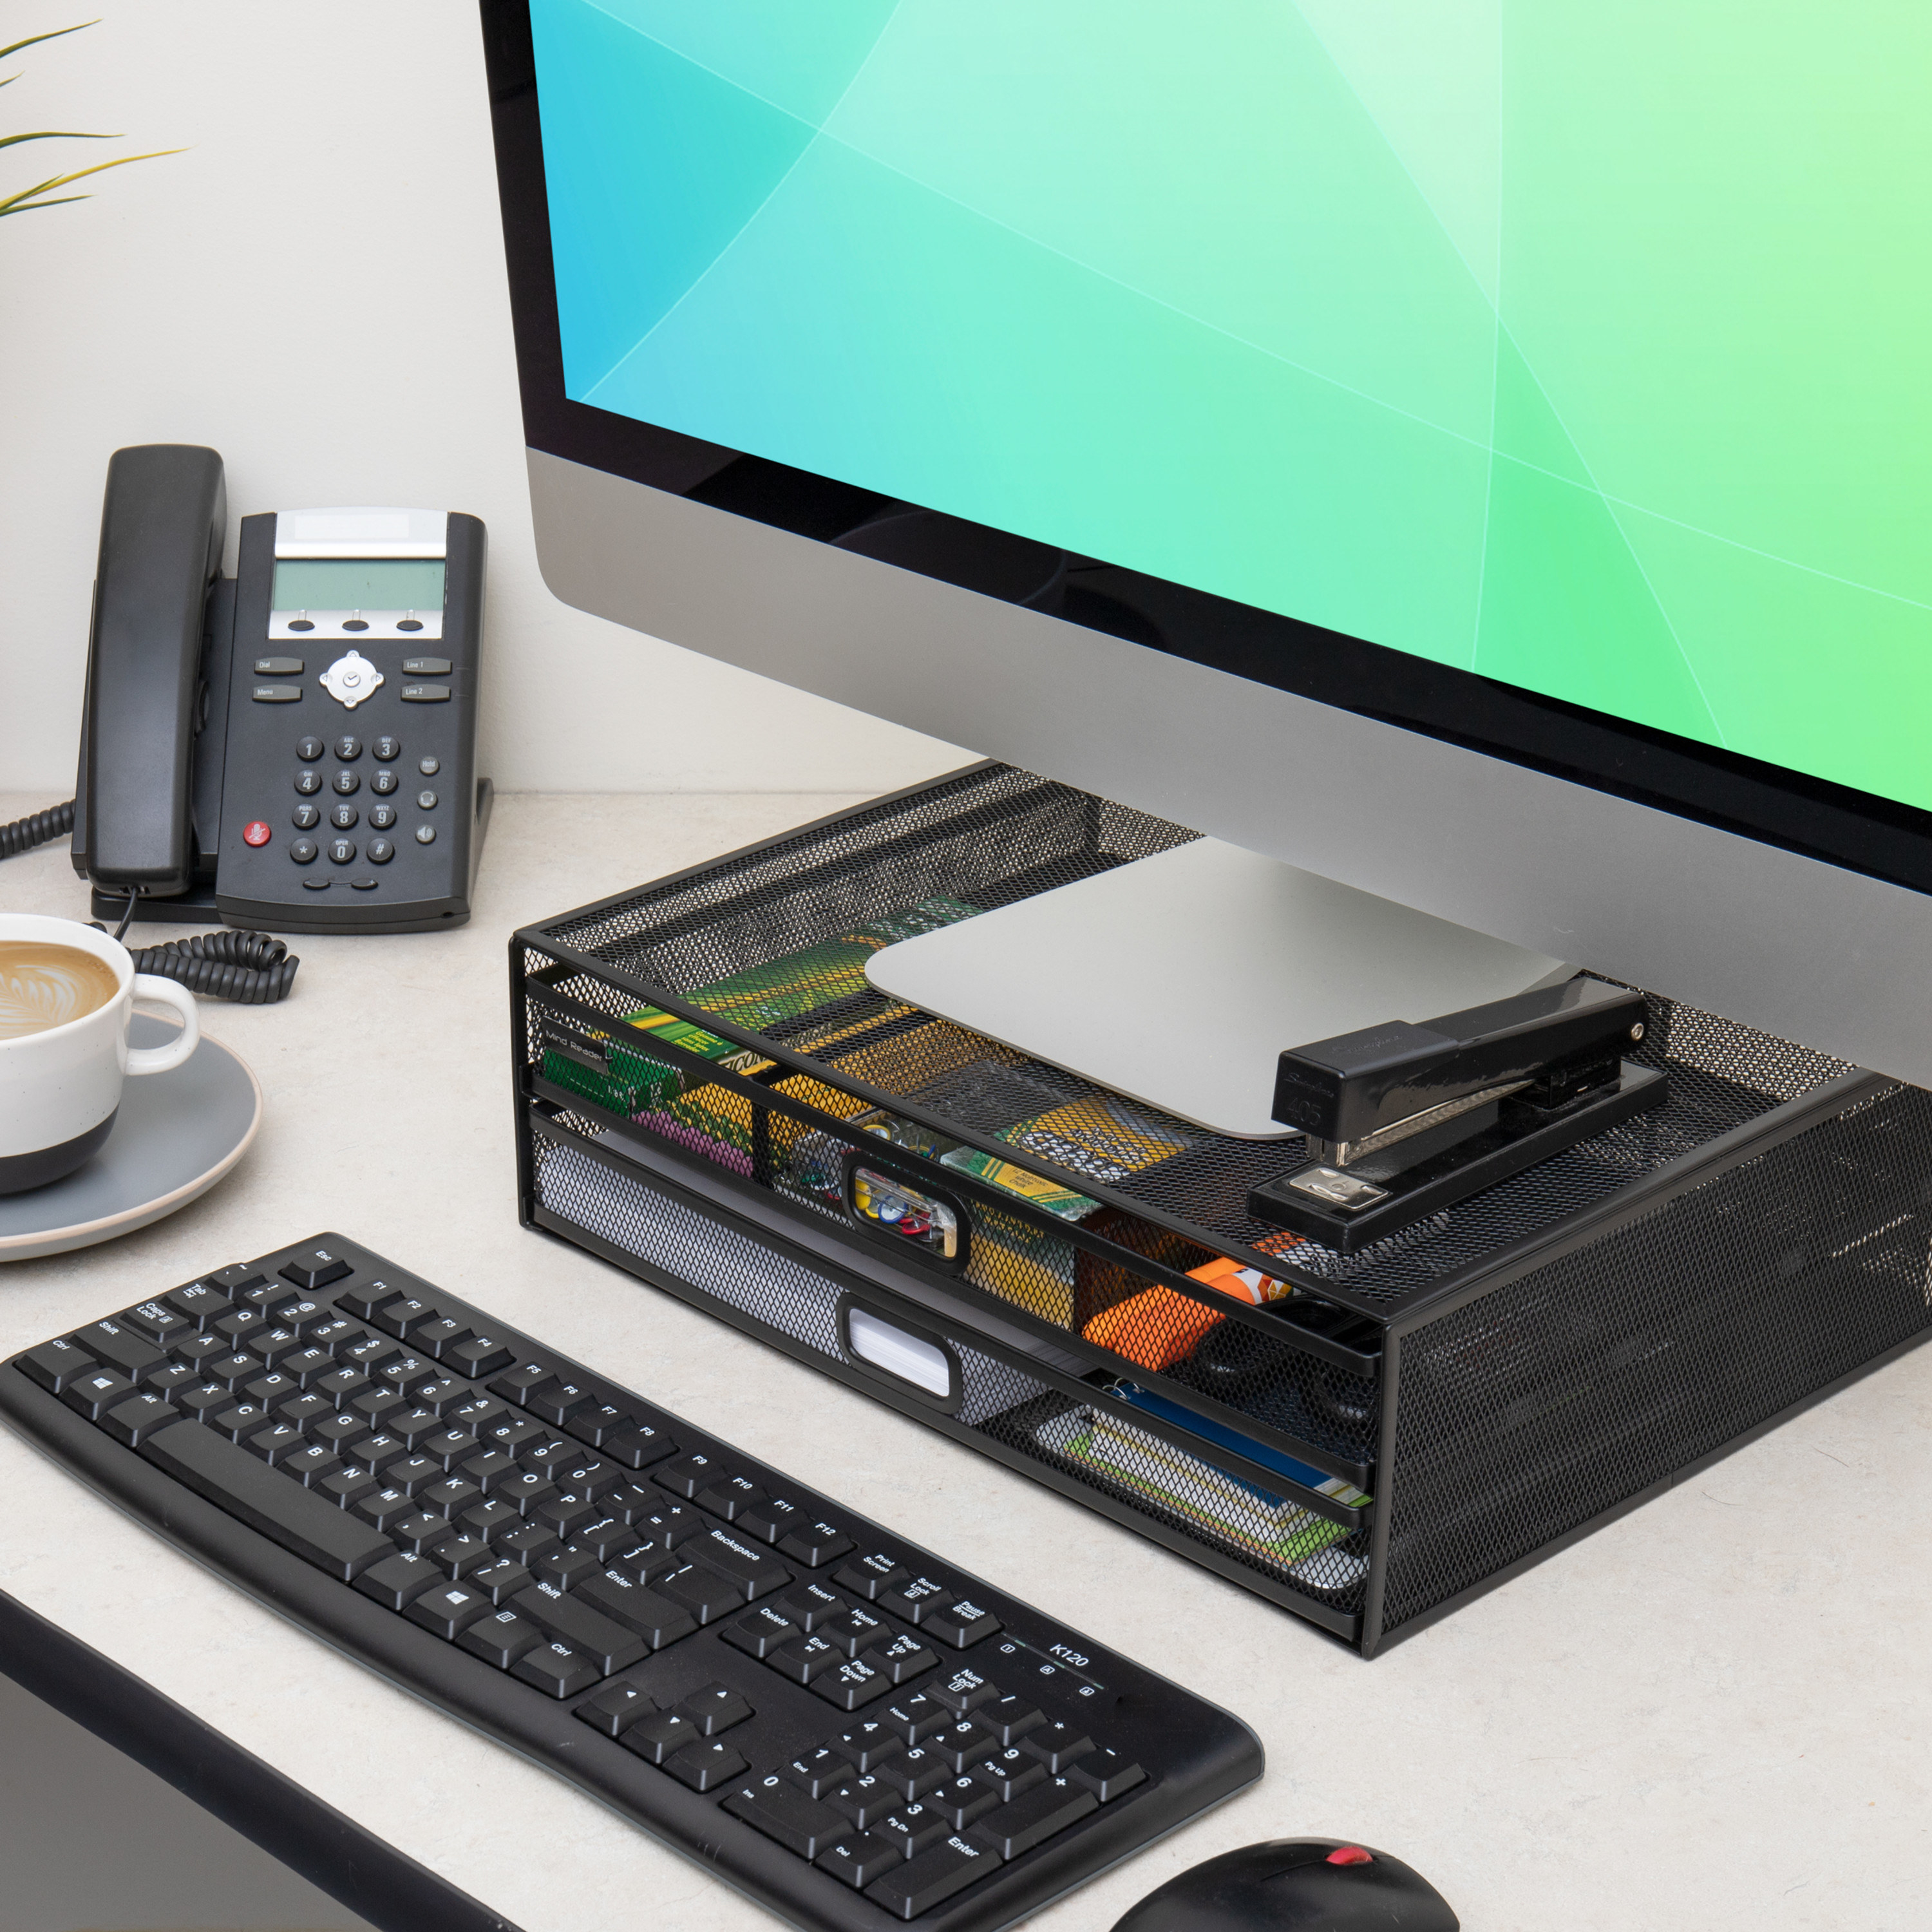 A monitor stand and desk organizer